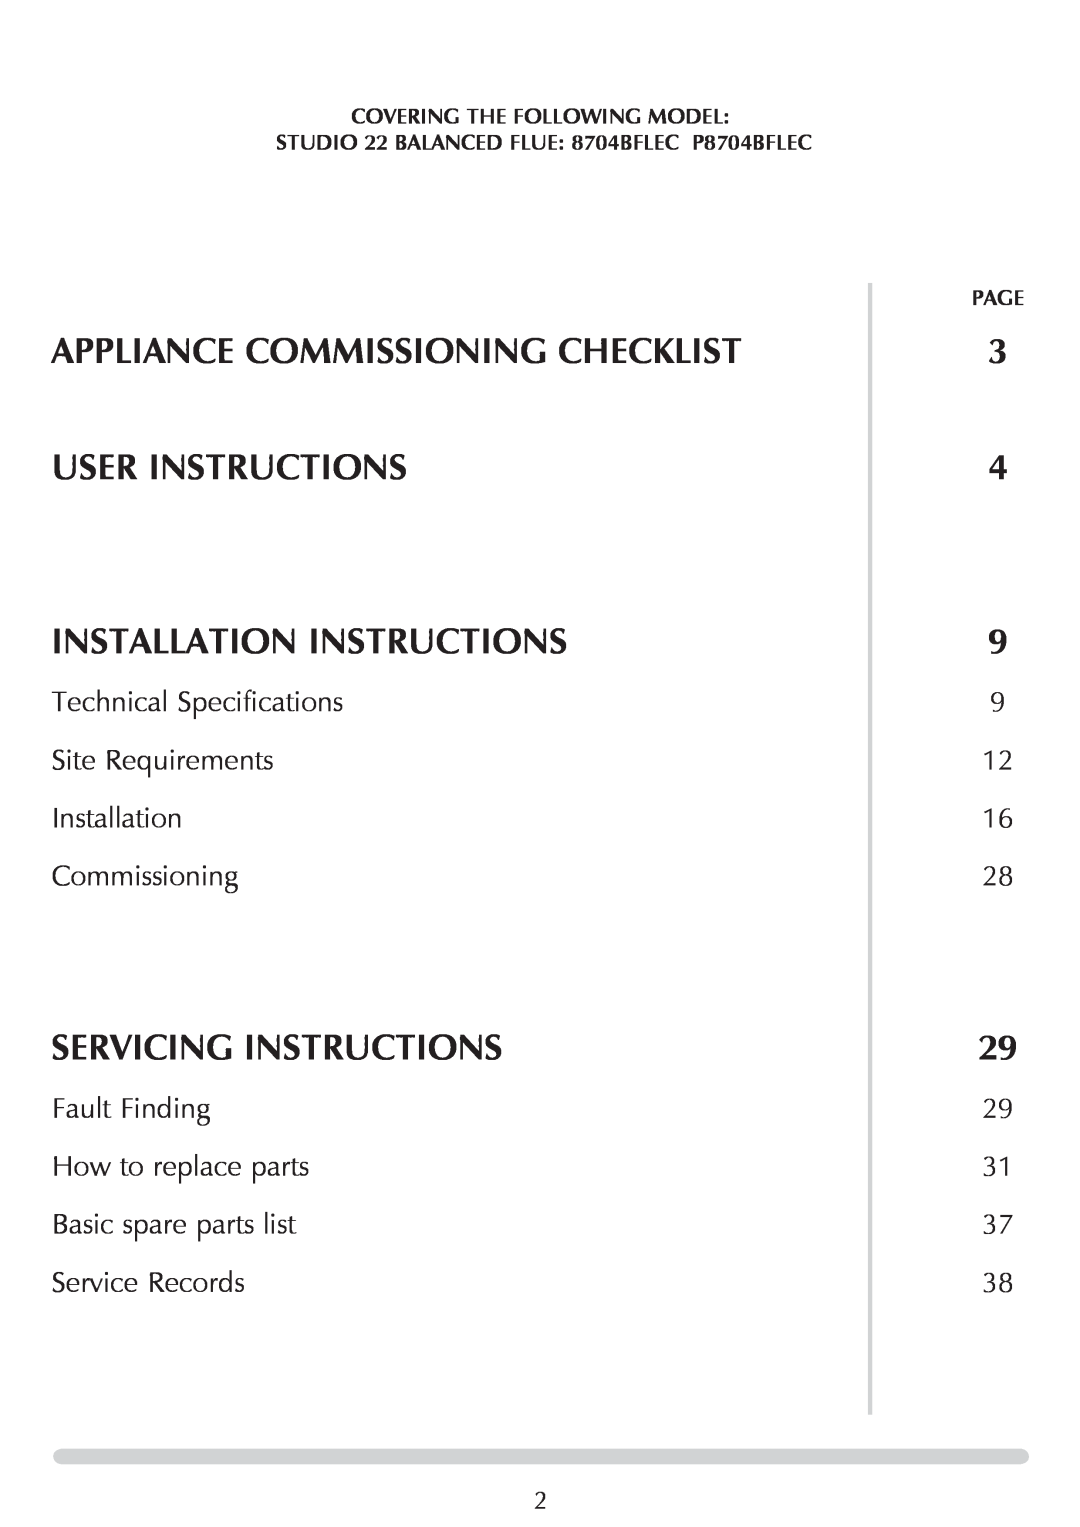 Stovax Studio 22 manual instaLlation Instructions, Servicing Instructions, Covering The Following Model, Page 